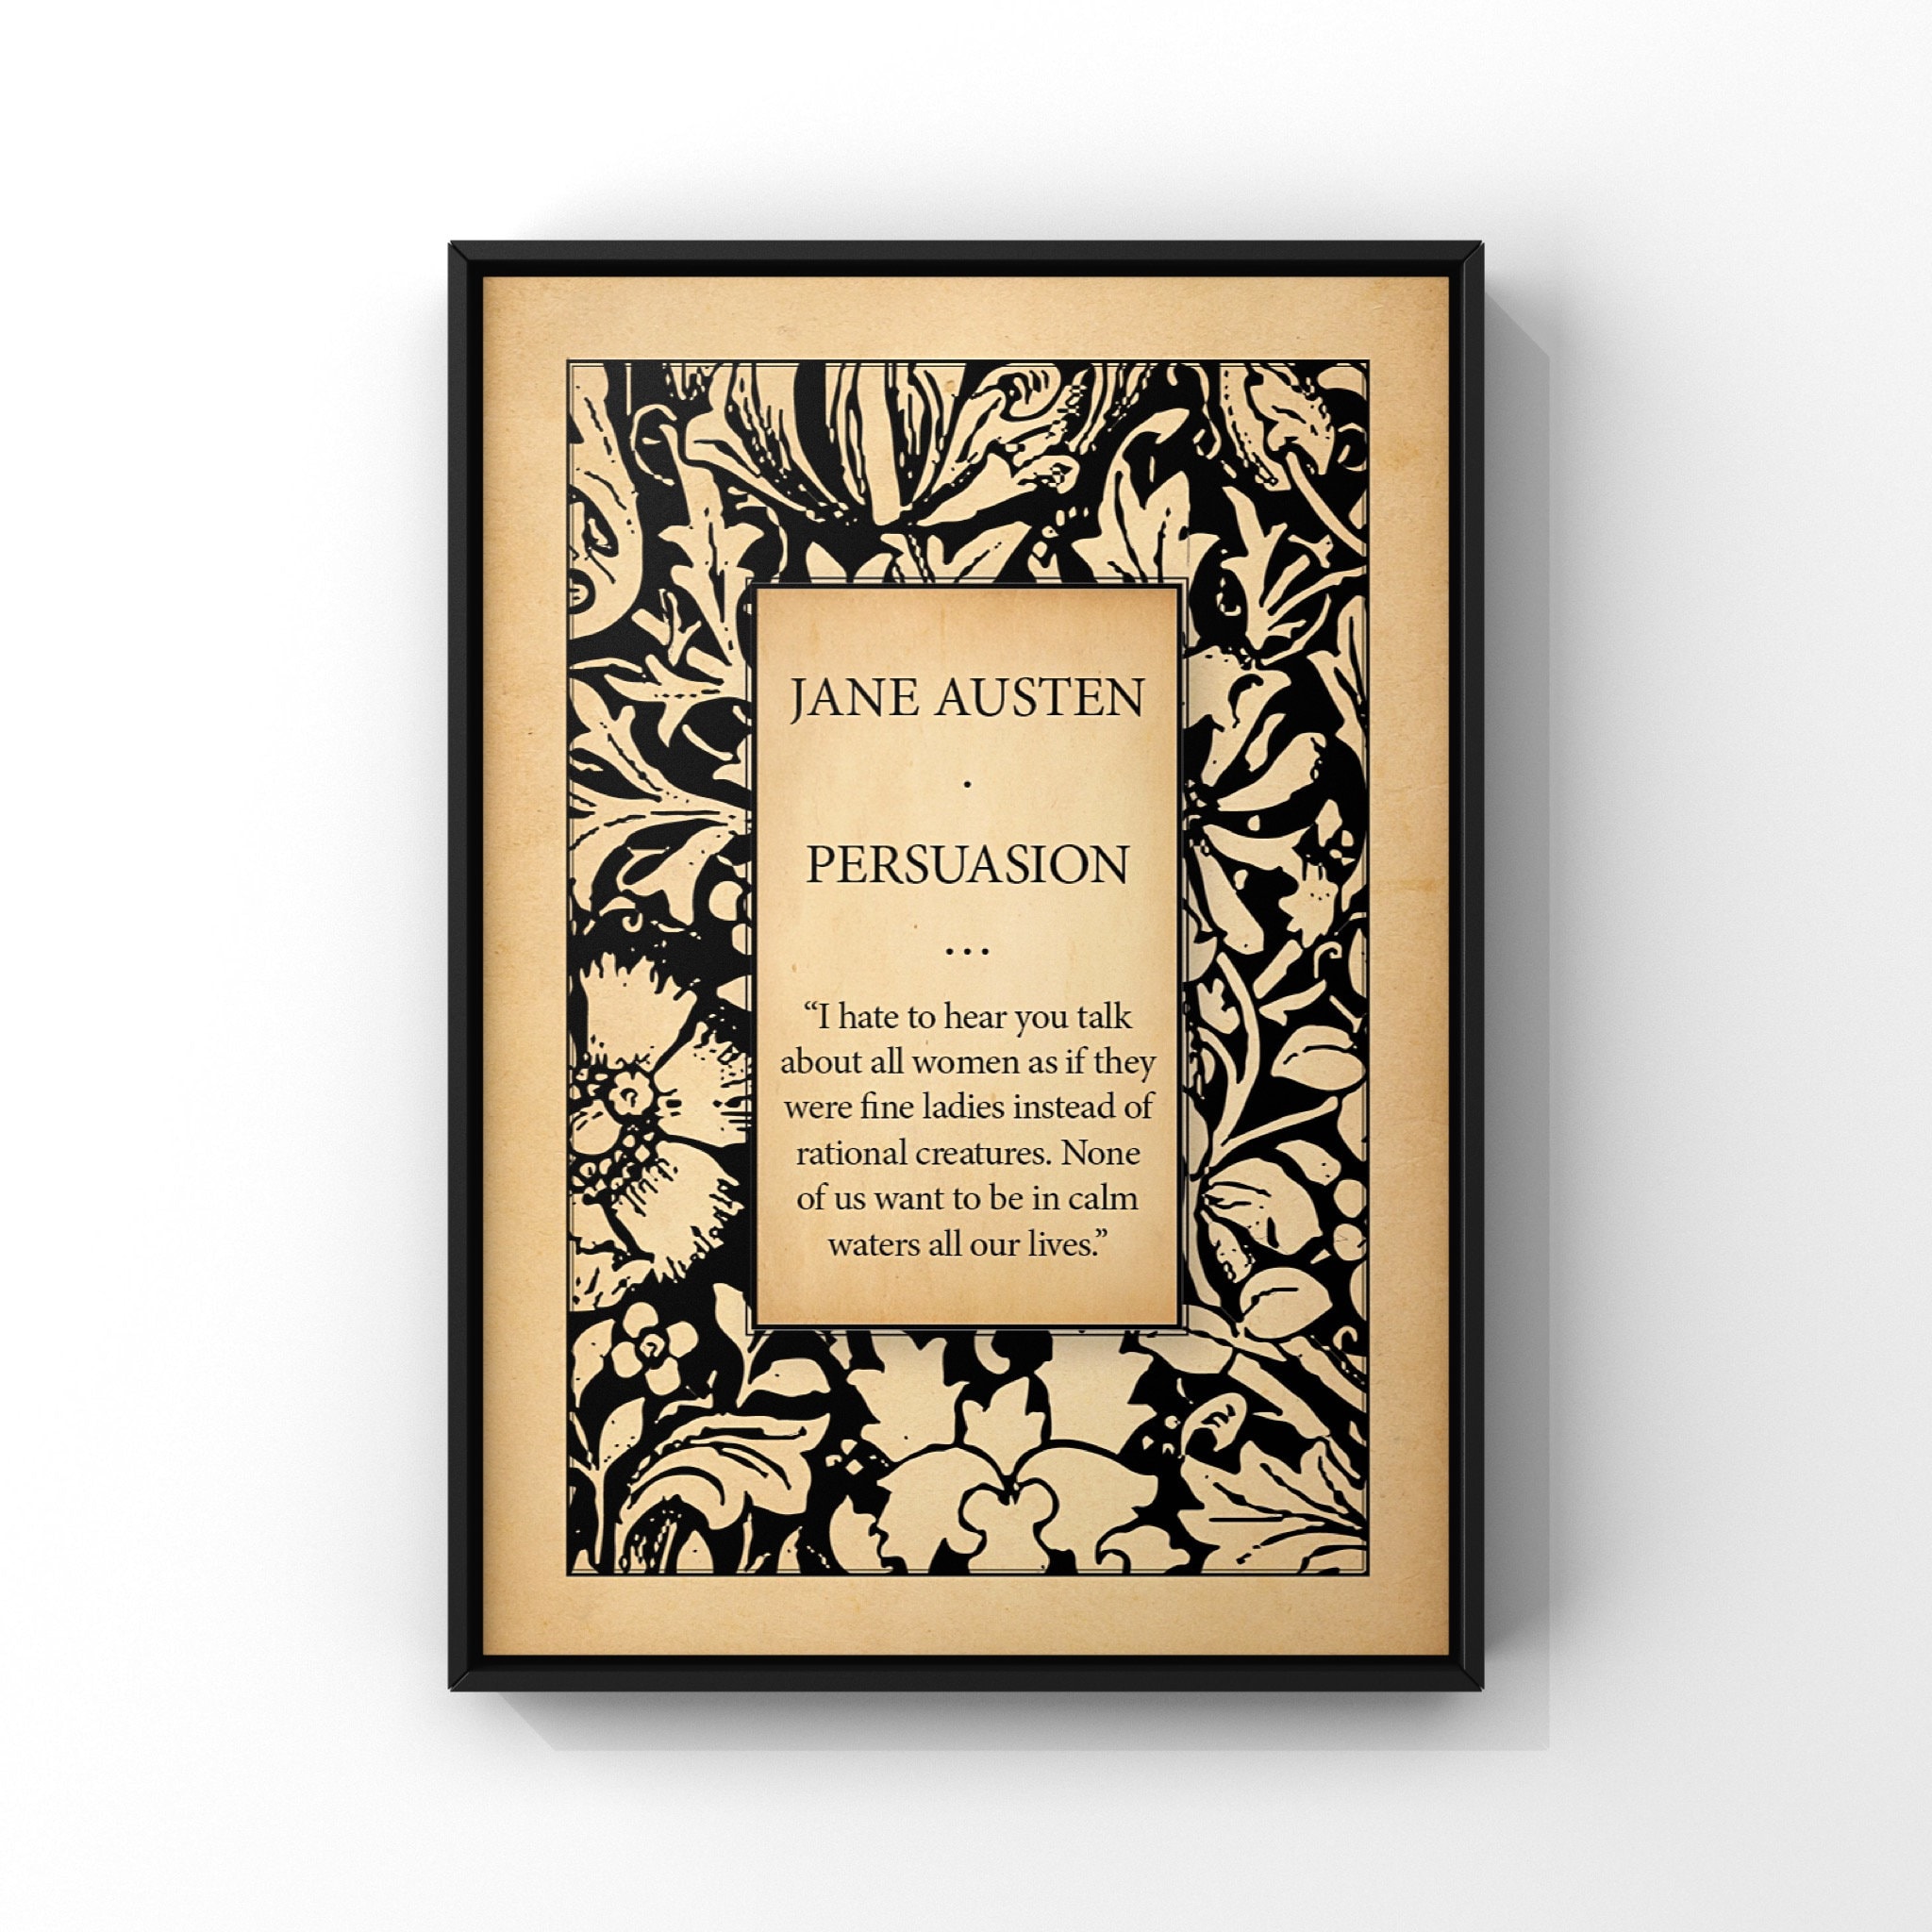 Jane Austen Book Title Page With Feminist Empowering Quote Art Print Persuasion Book Cover Art Poster Print Unframed Literary Wall Decor